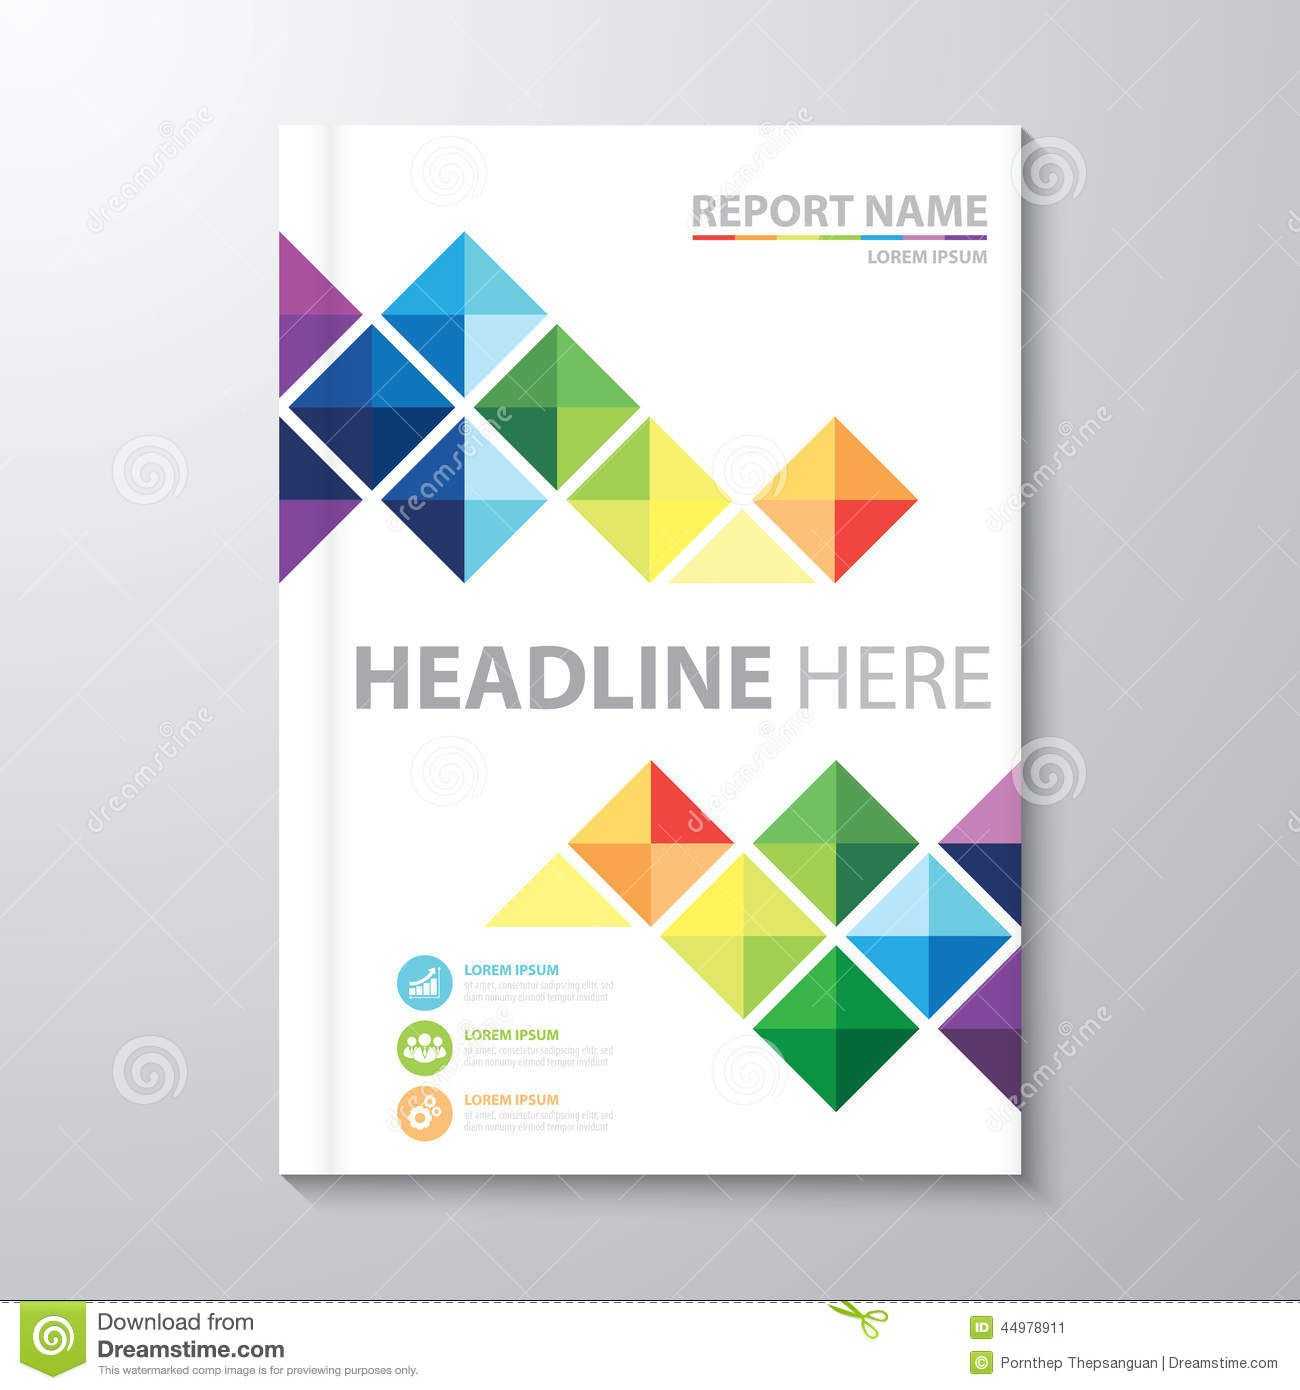 001 Template Ideas Report Cover Page Templatelab With Word Title Page Templates